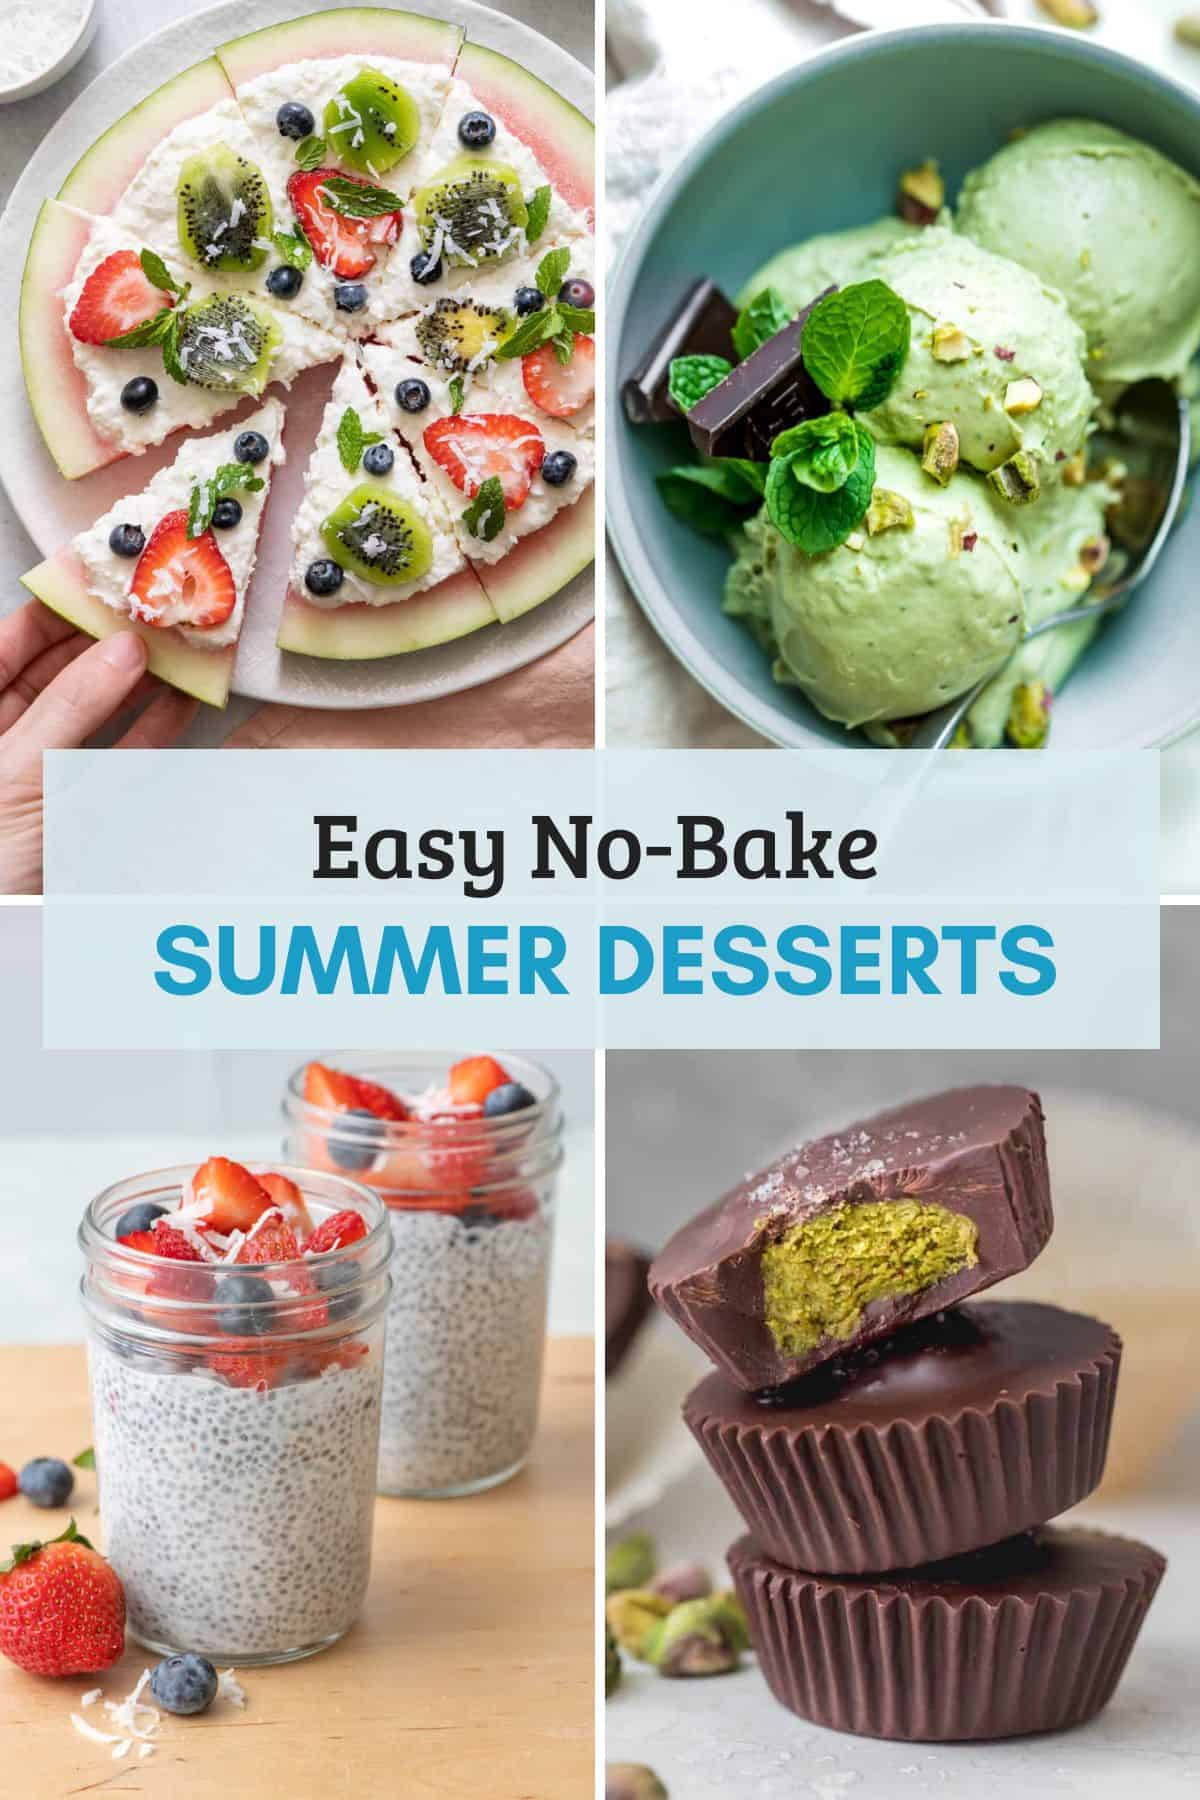 4 image featured collage for no bake summer inspired desserts.